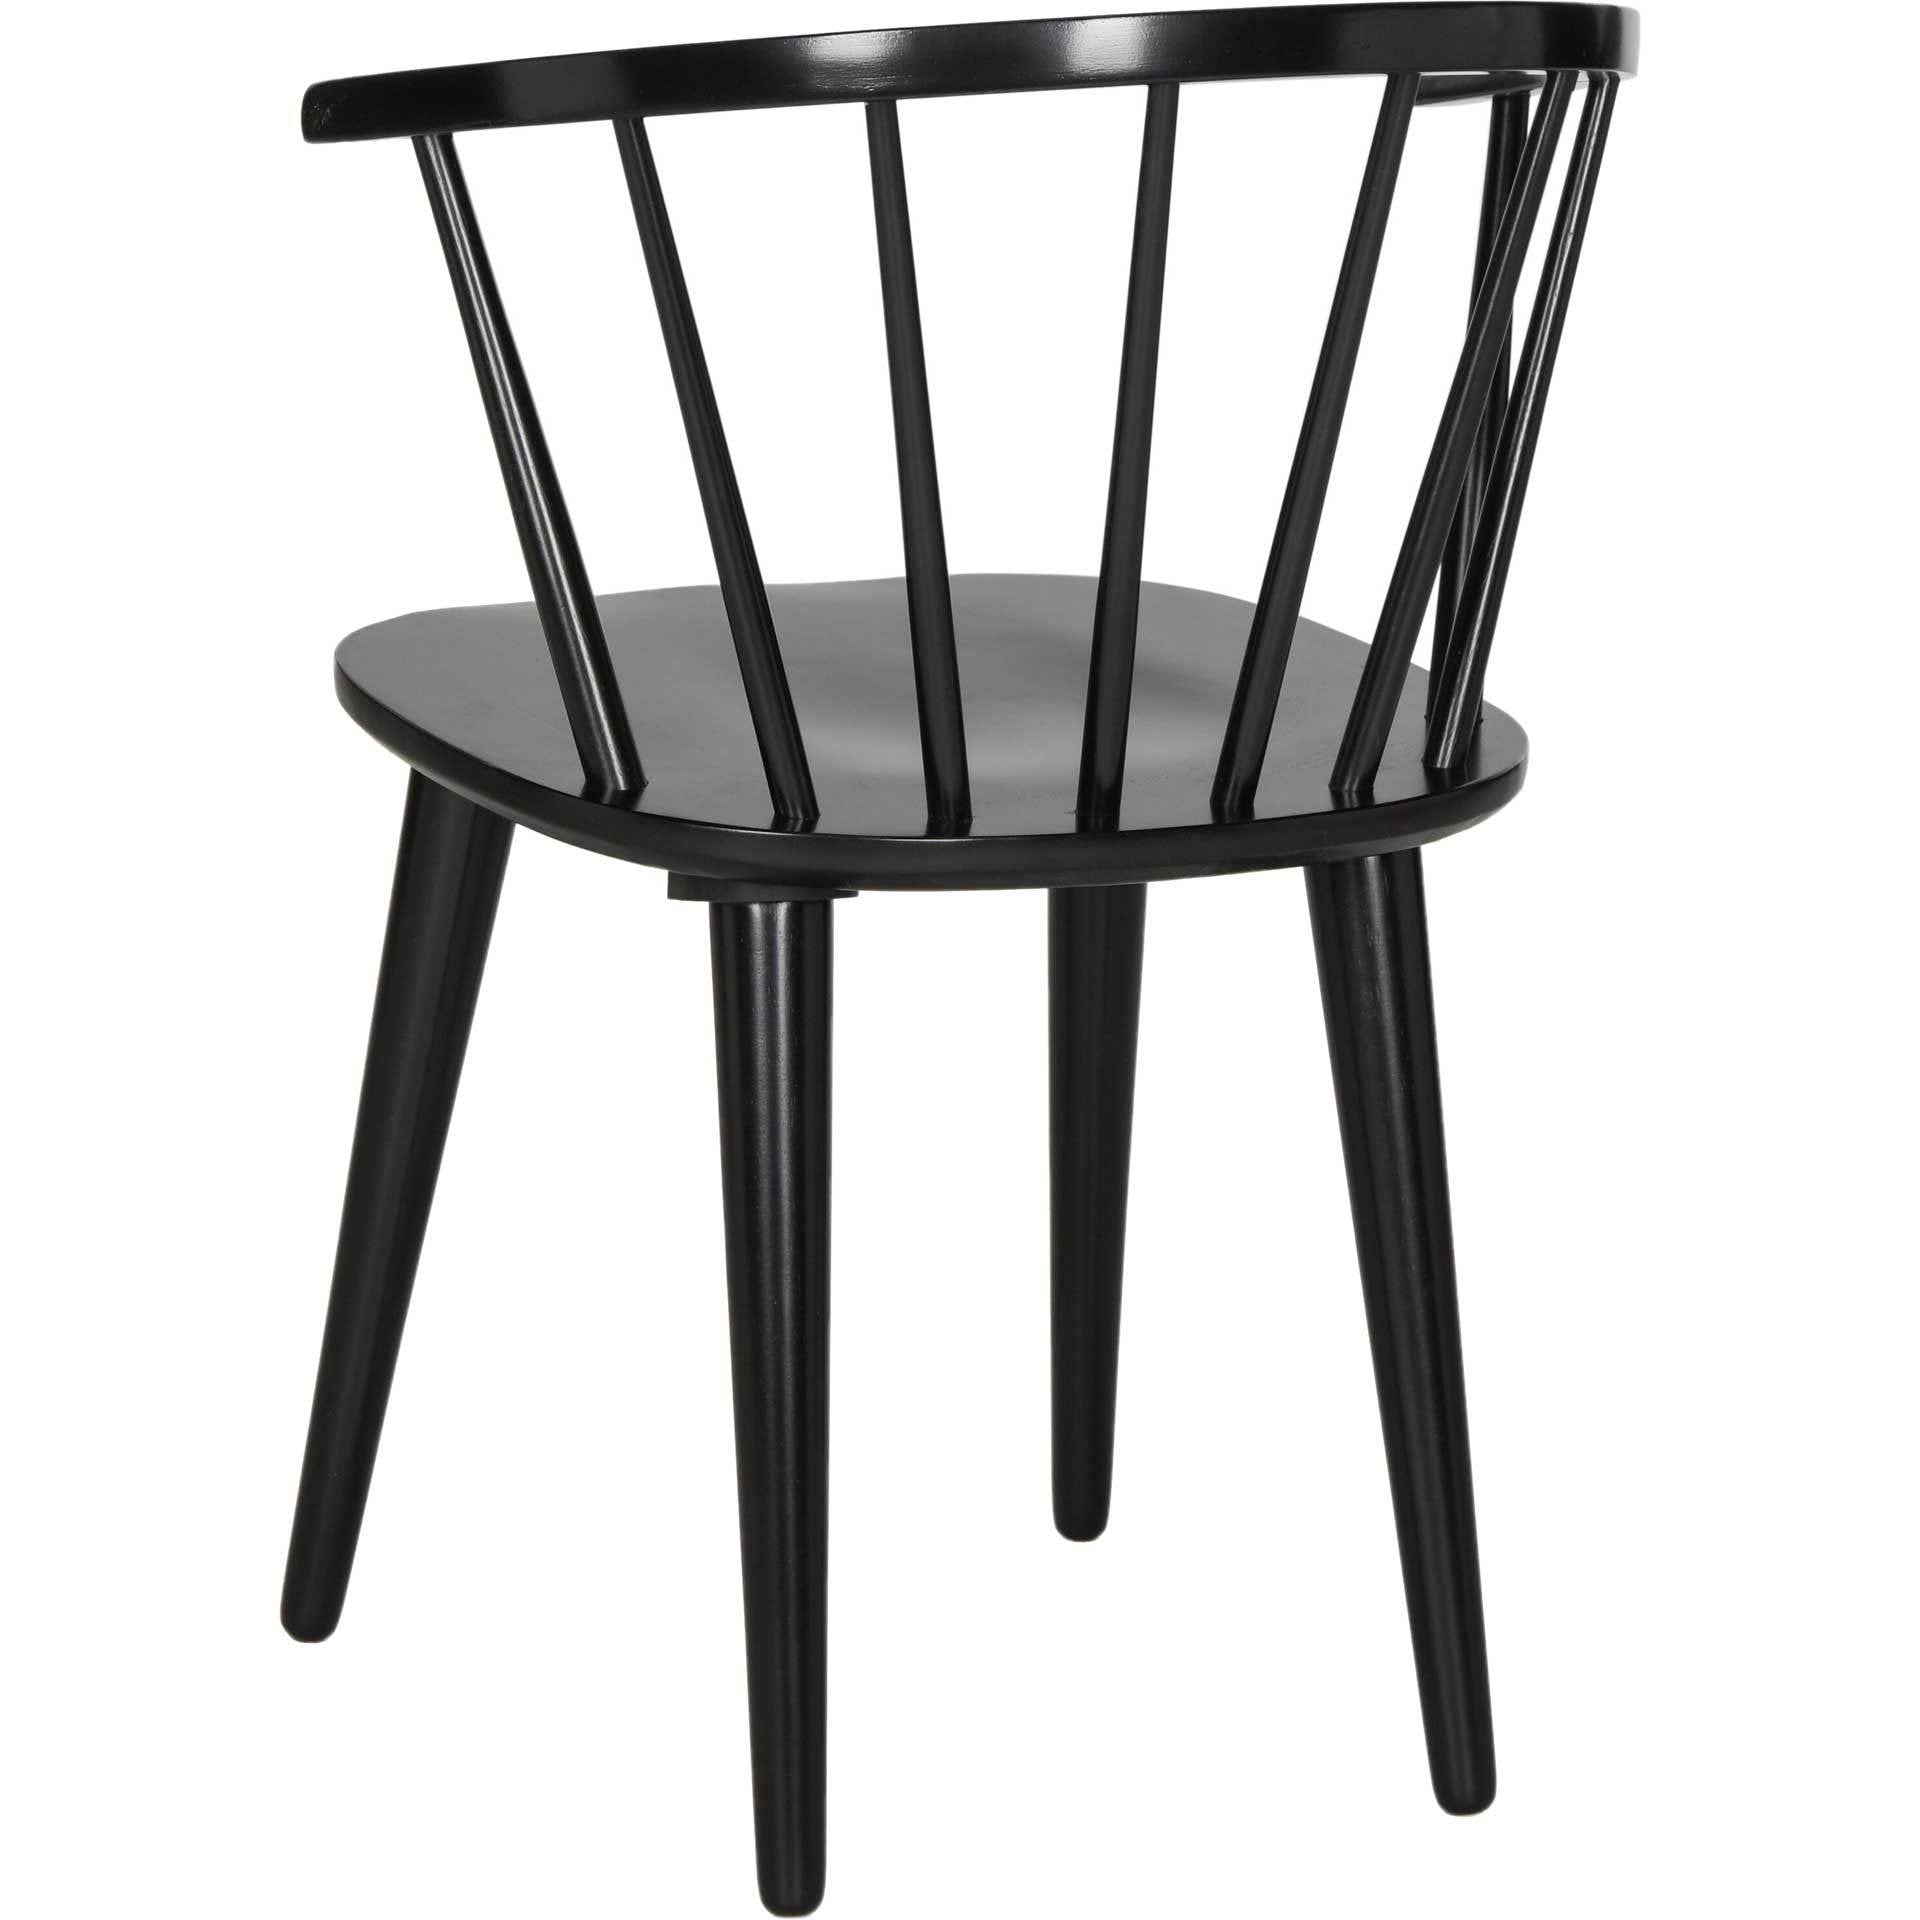 Blair Curved Spindle Side Chair Black (Set of 2)